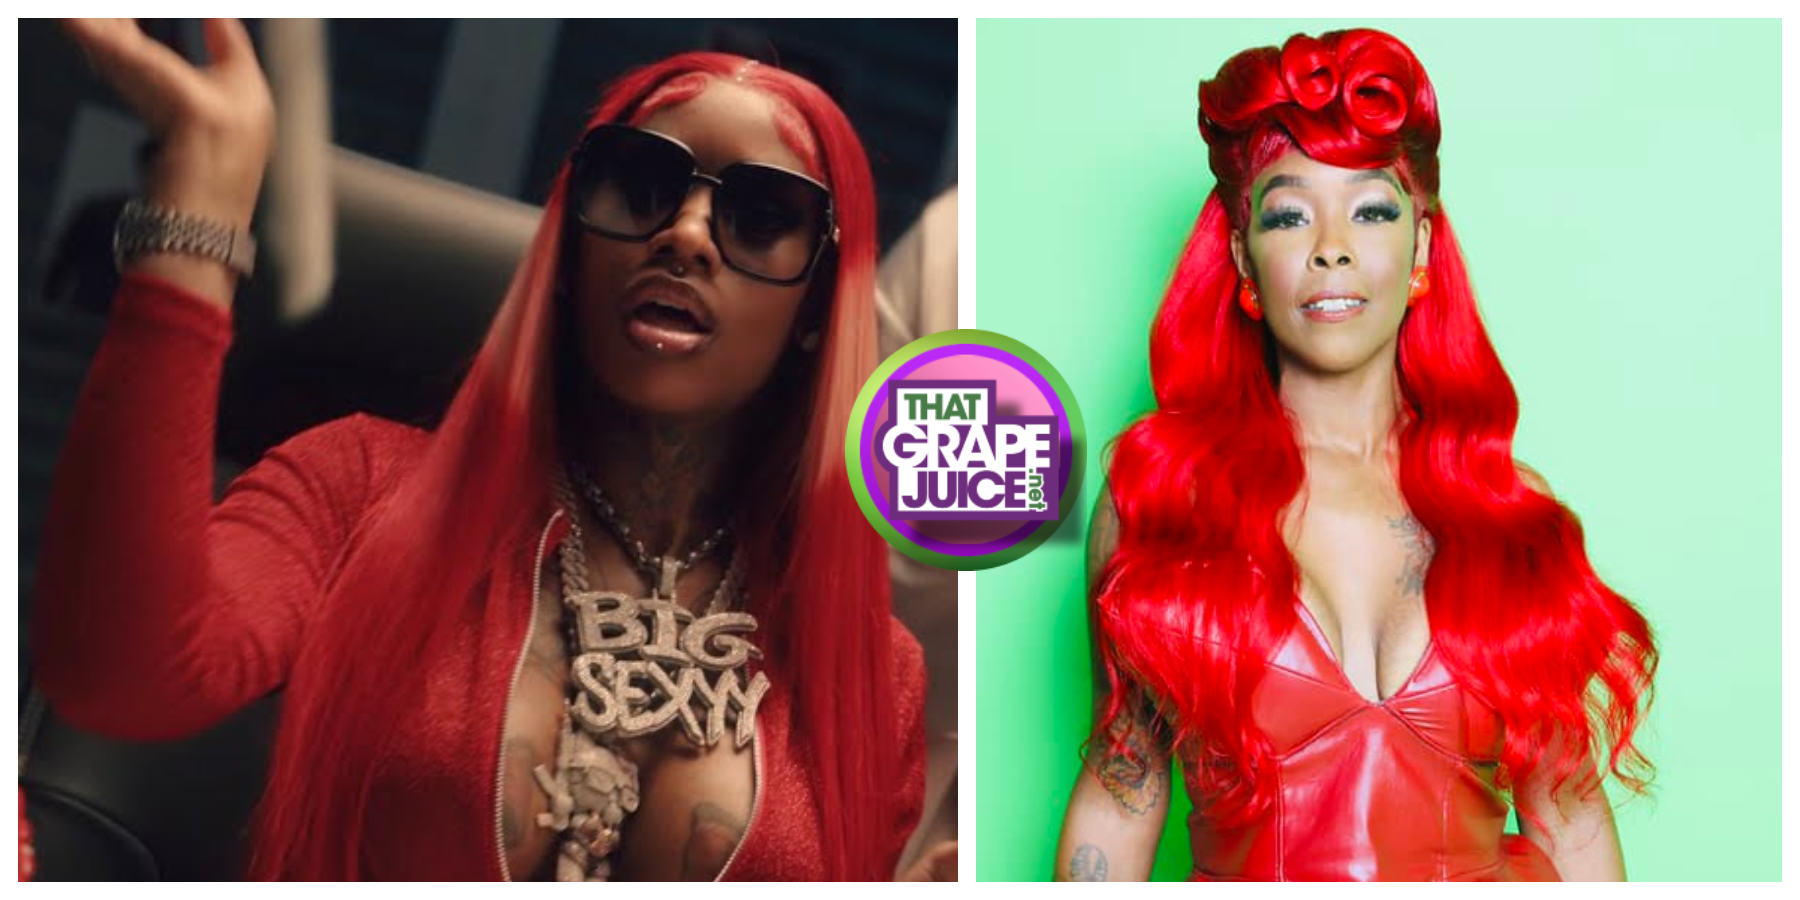 Sexyy Red Says She’d “Drag Khia’s Old Bones In Real Life” For Calling Her a “Dumpster-Smelling B*tch”